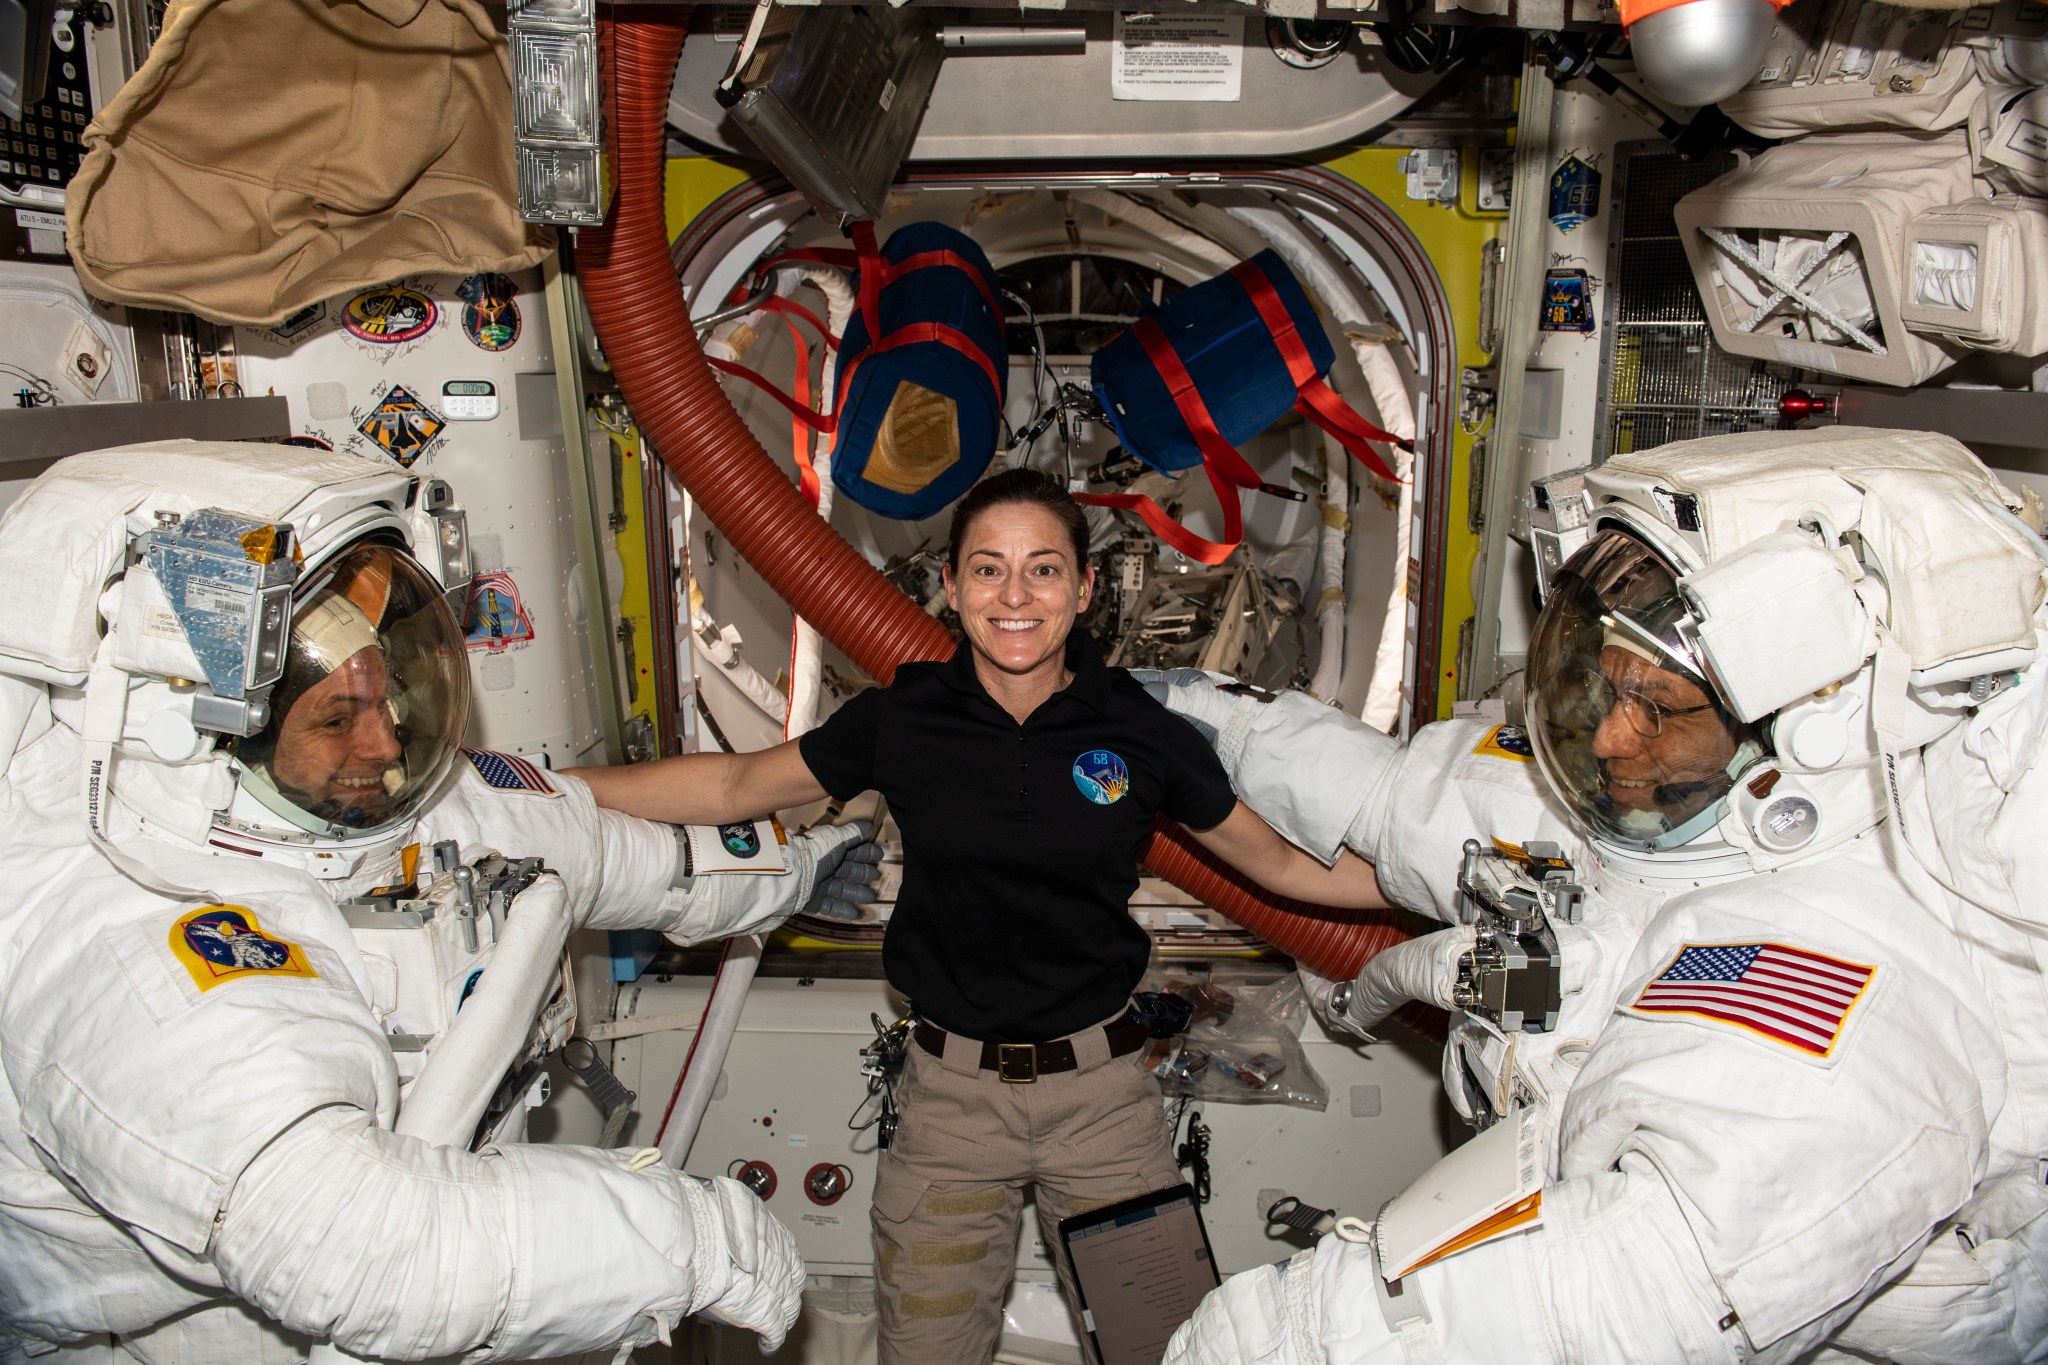 (Dec. 21, 2022) u002du002d- NASA Expedition 68 Flight Engineer Nicole Mann helps NASA spacewalkers Josh Cassada, left, and Frank Rubio, suit up for a spacewalk to install a roll-out solar array on the International Space Station.